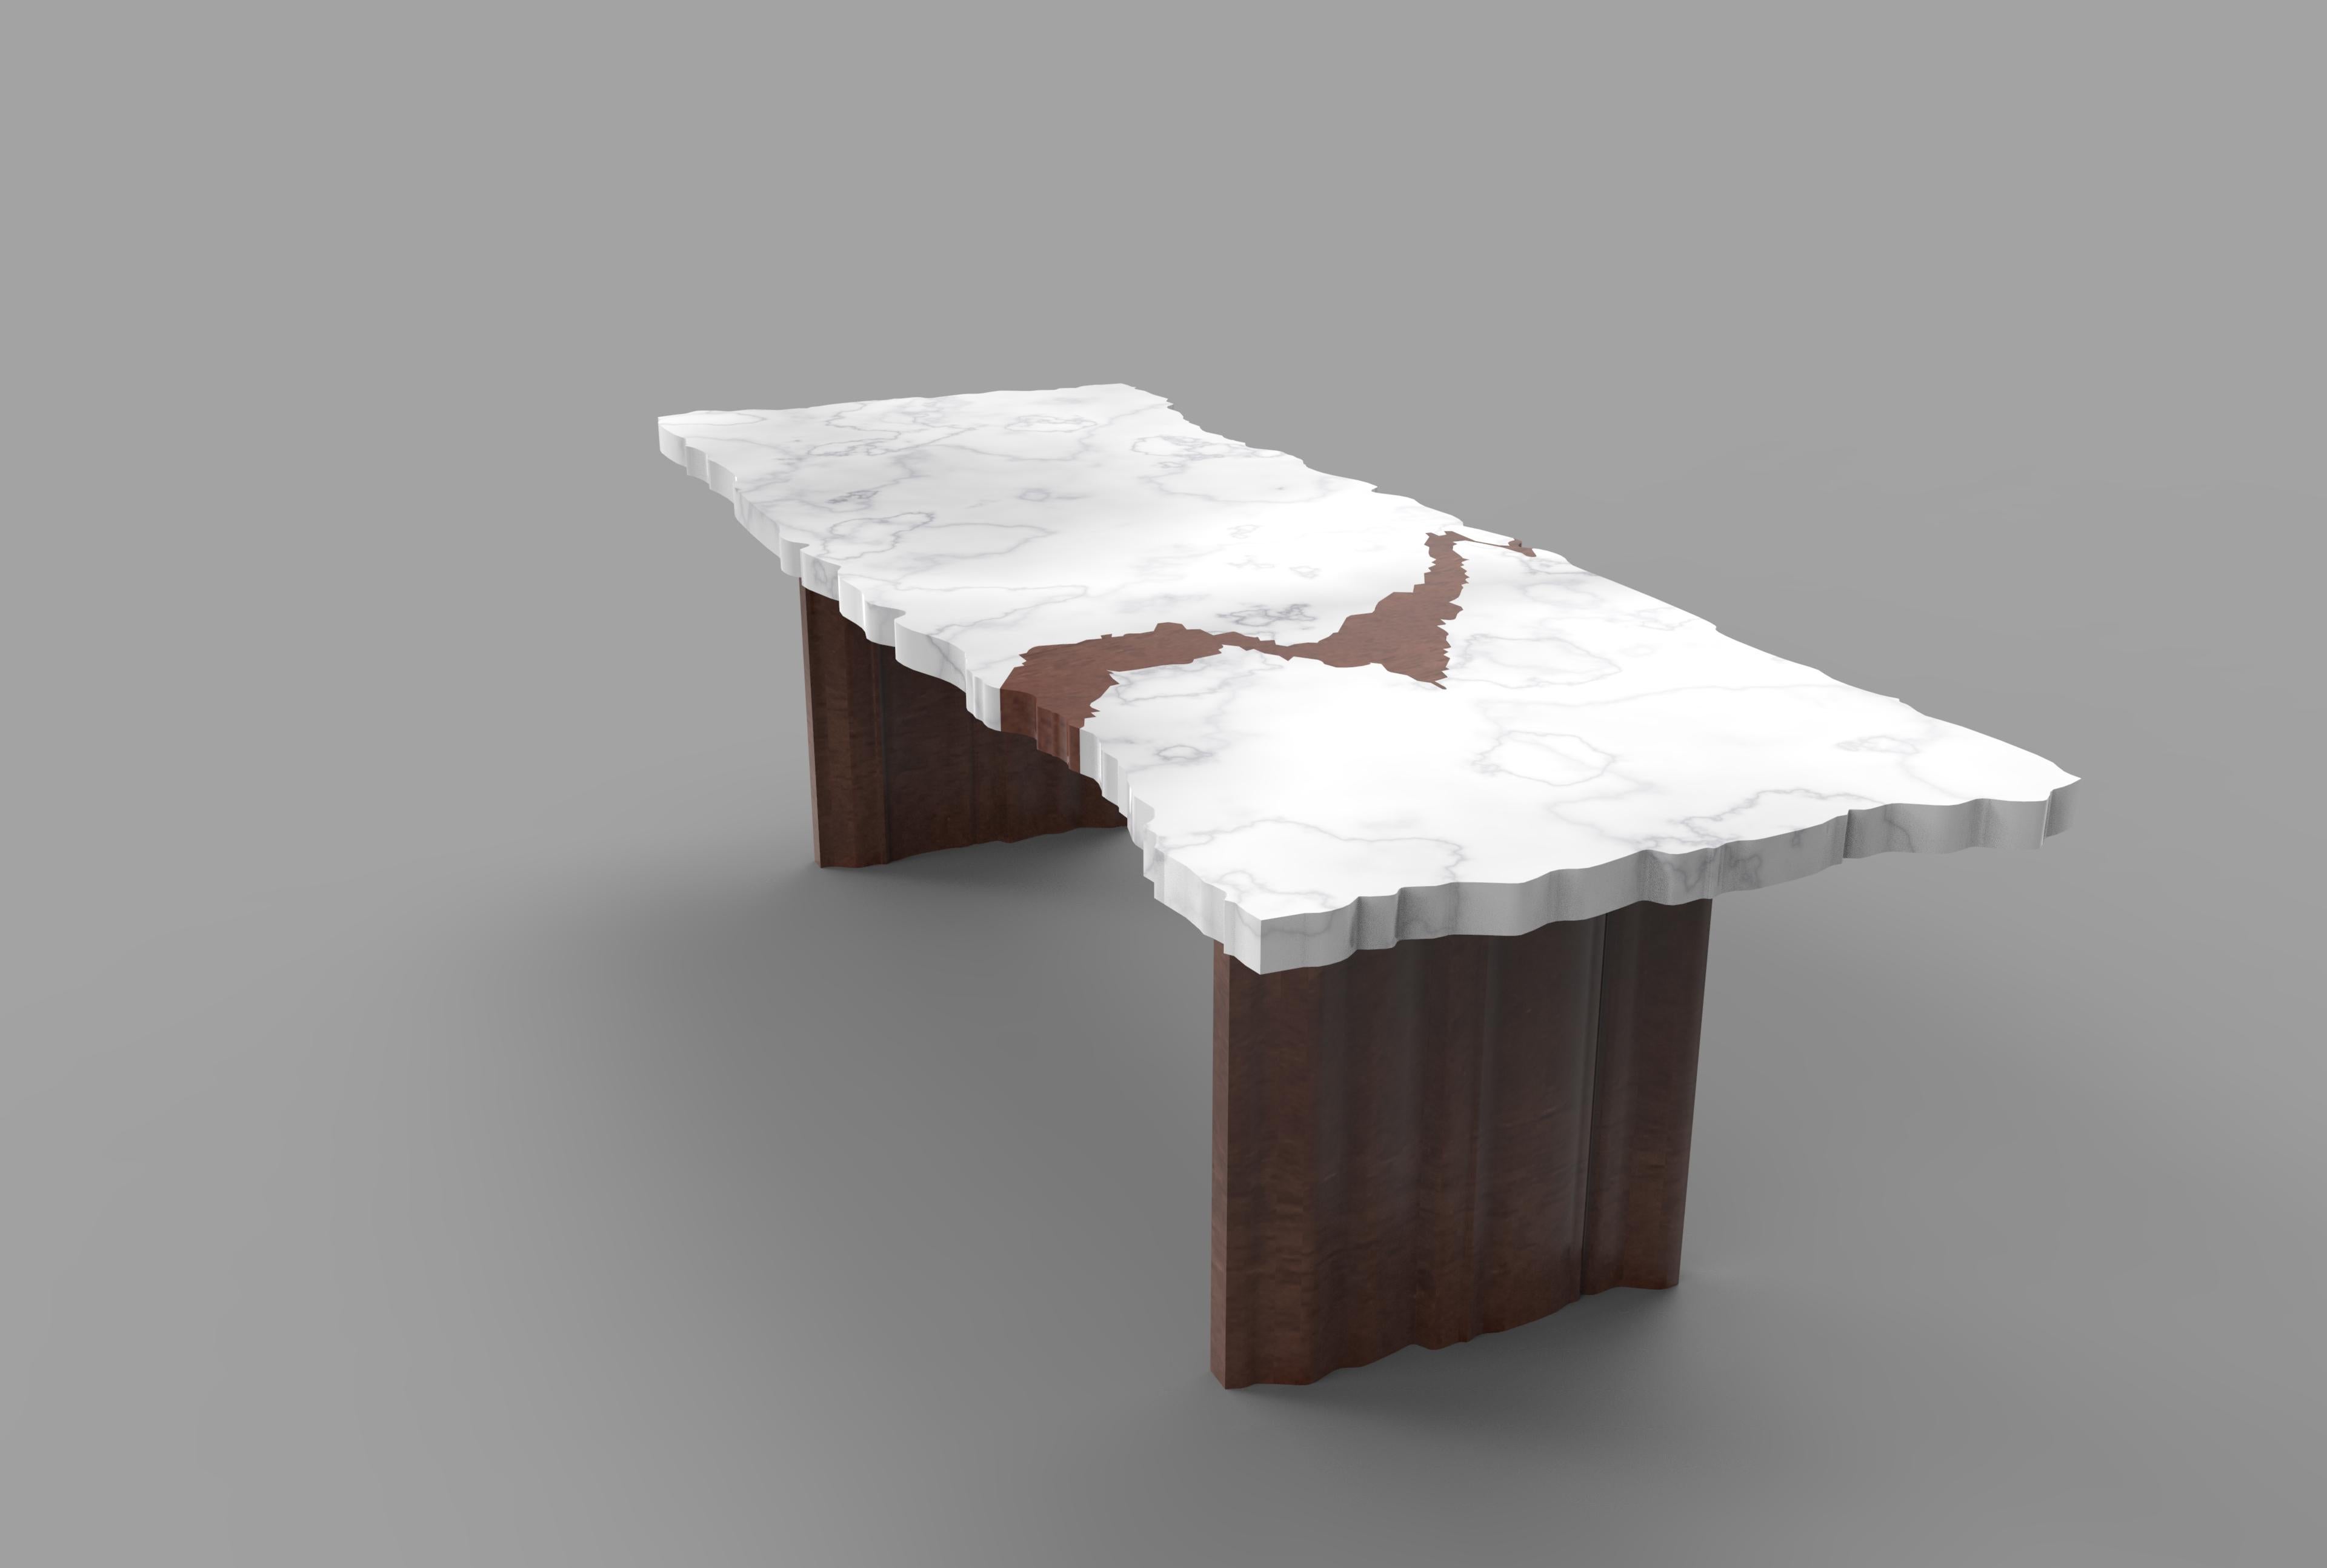 The FRAK-tur bespoke table is designed by Nathalie Ryan. The rectangular table top is made in handcut Carrara marble with a wedge of wood inserted inspired by the natural cracks of the marble; the feet are made in walnut wood. The table is fully